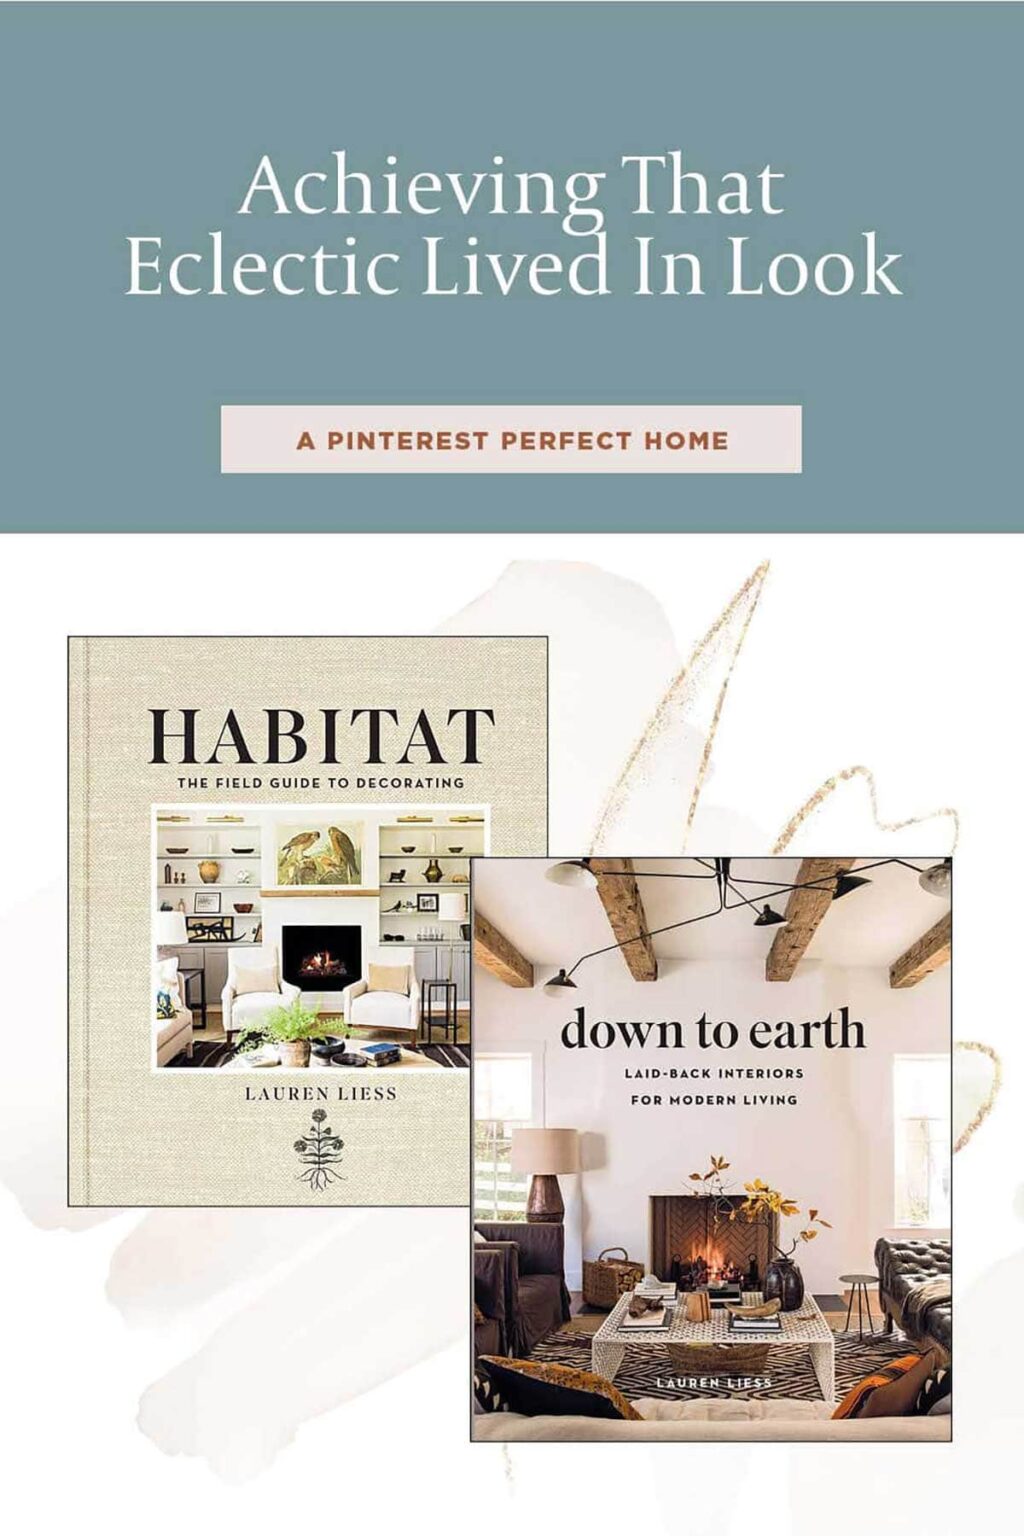 19 Best Interior Design Books - House Of Hipsters - Home Decor